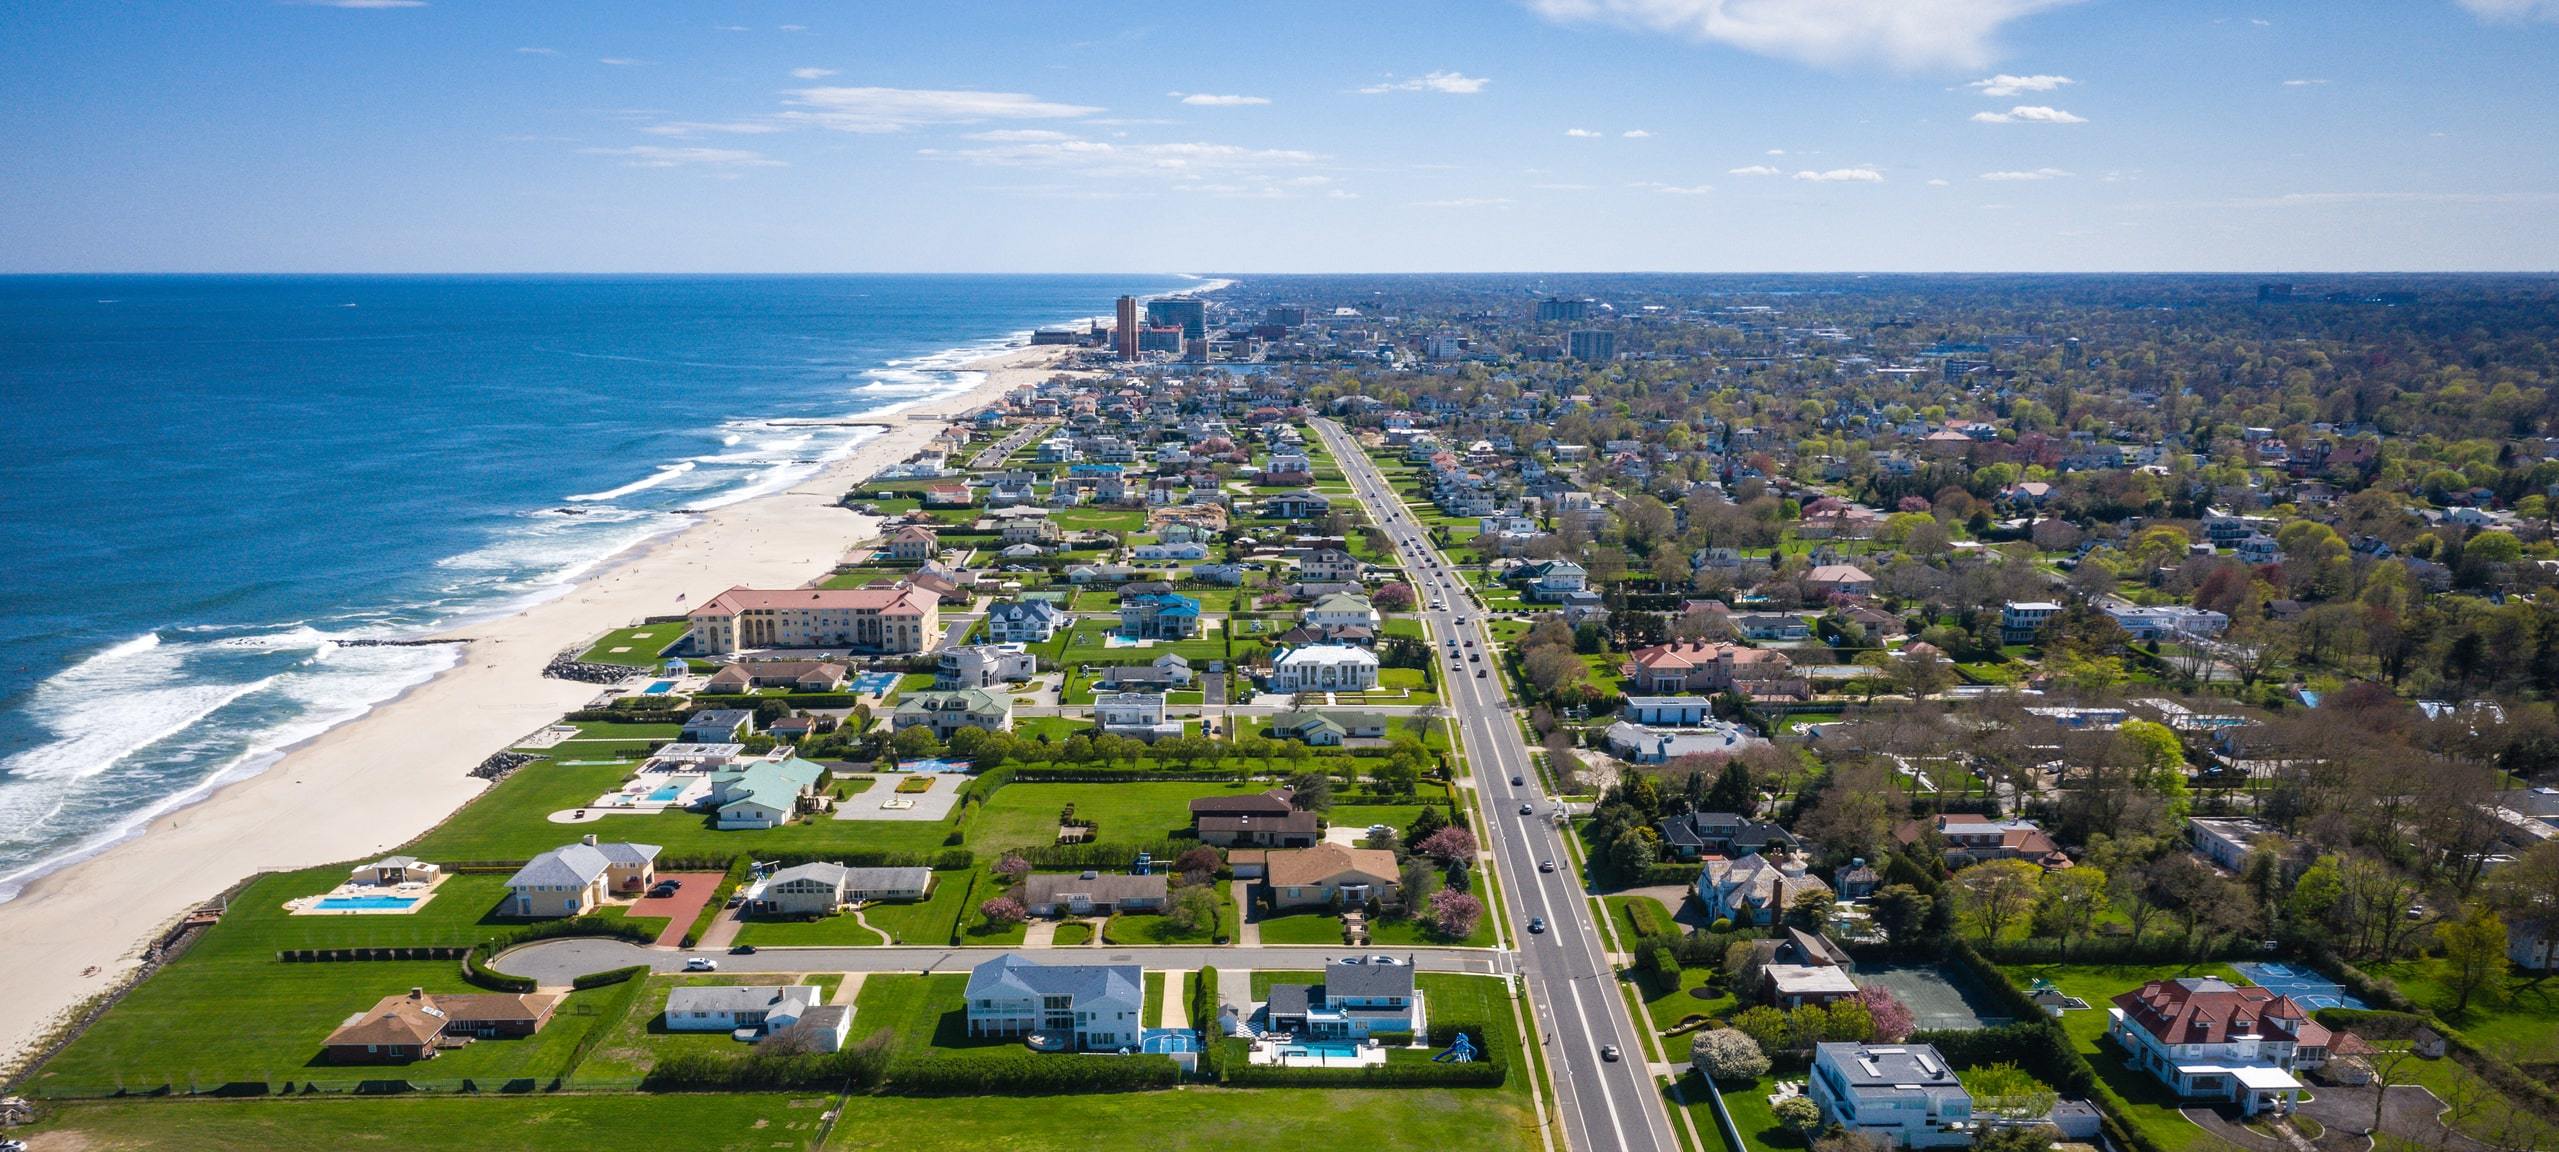 Aerial view of Deal, NJ beach and waterfront properties